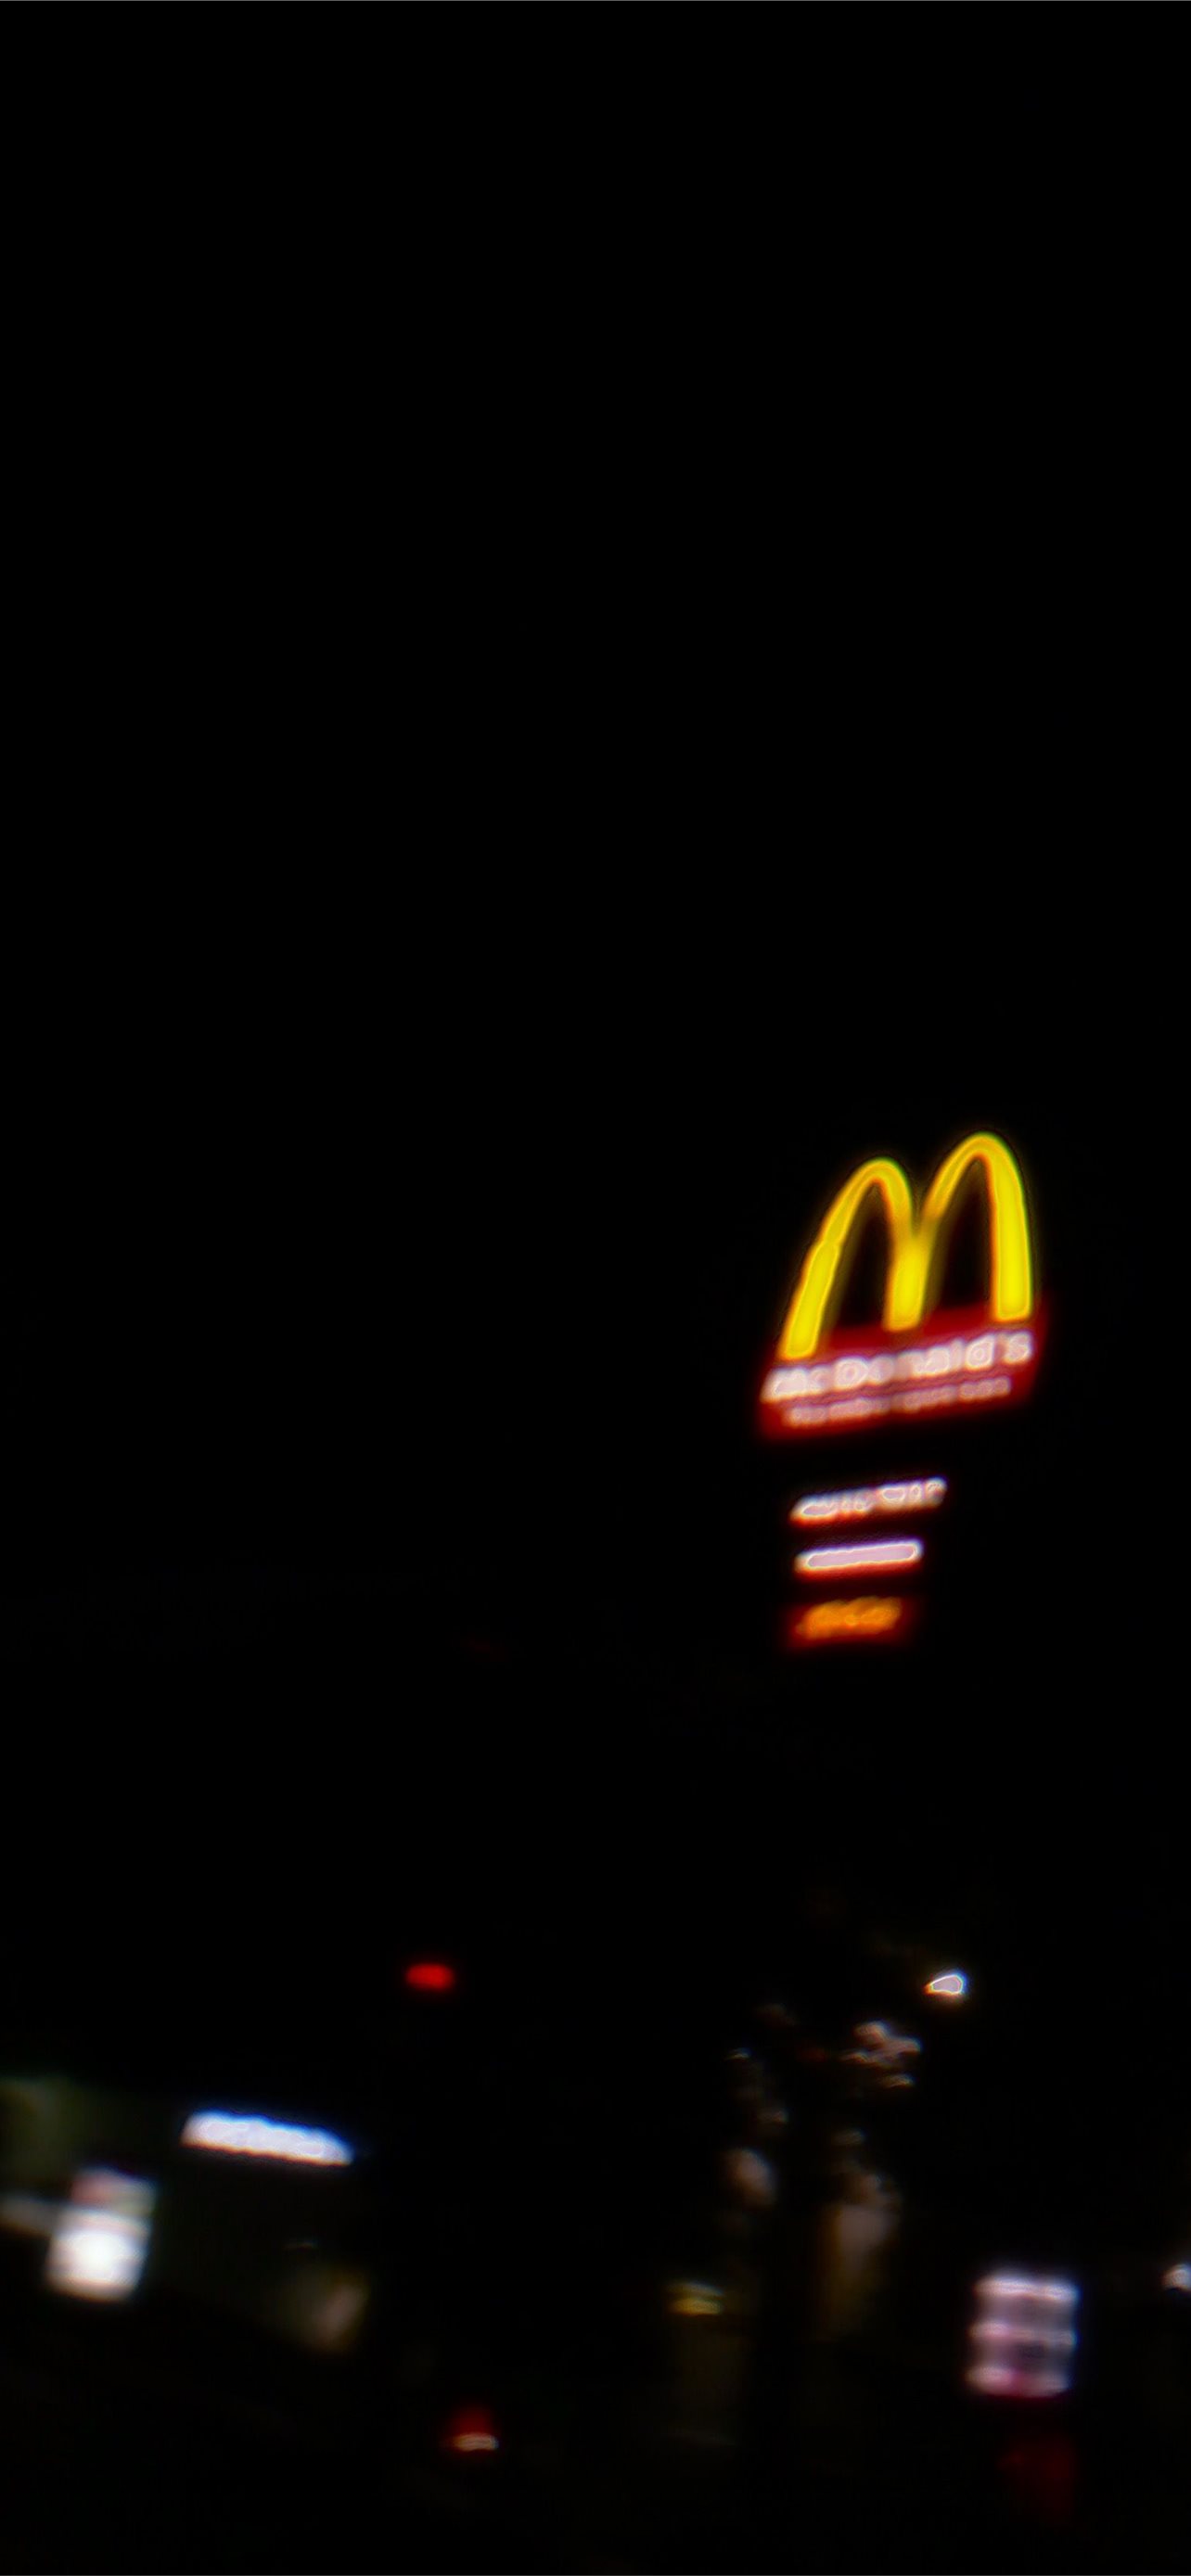 500 Mcdonalds Pictures HD  Download Free Images on Unsplash